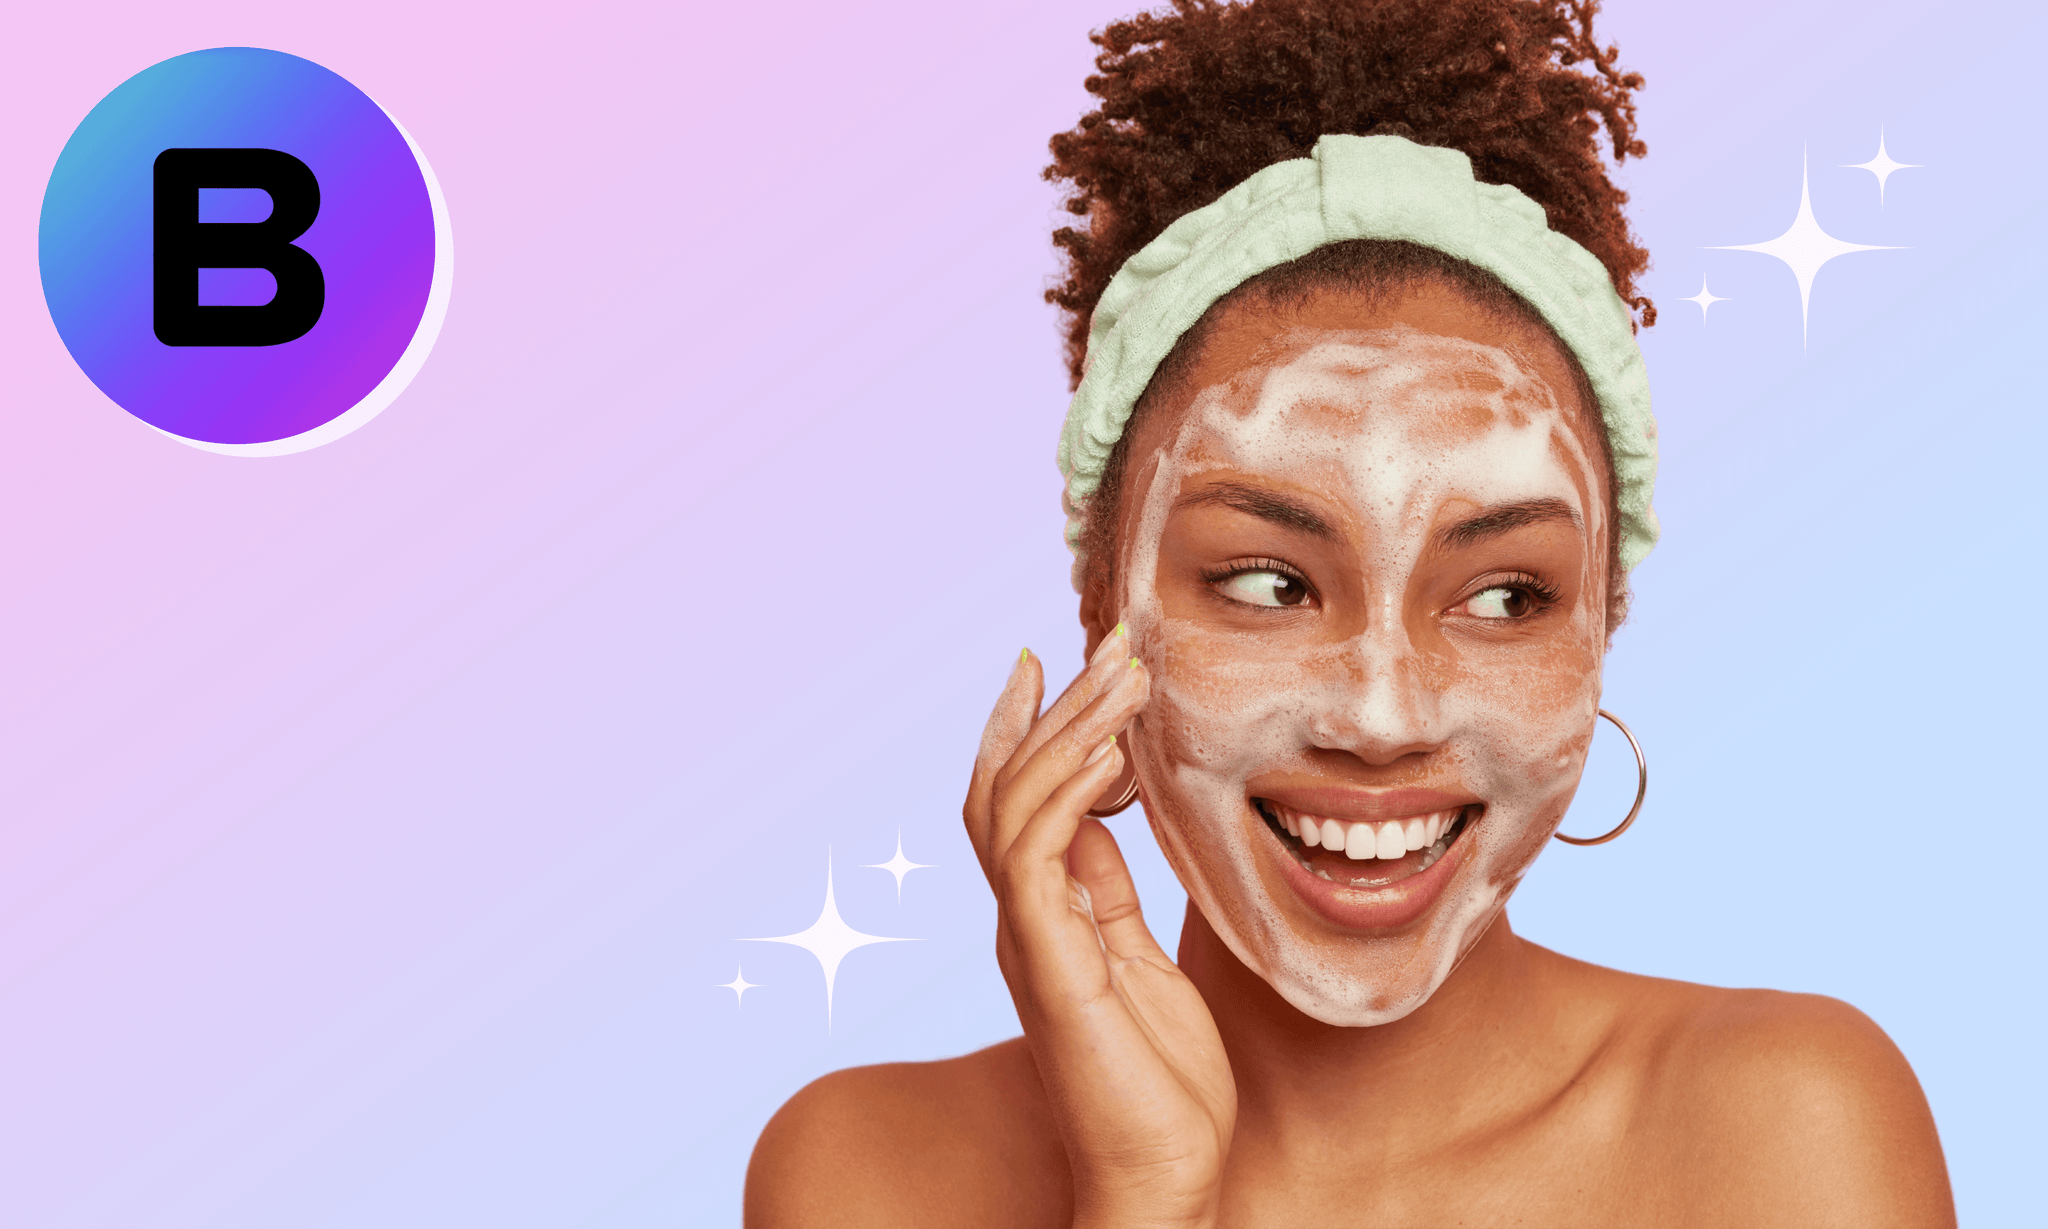 Slay the Summer with a Fresh Skincare Routine